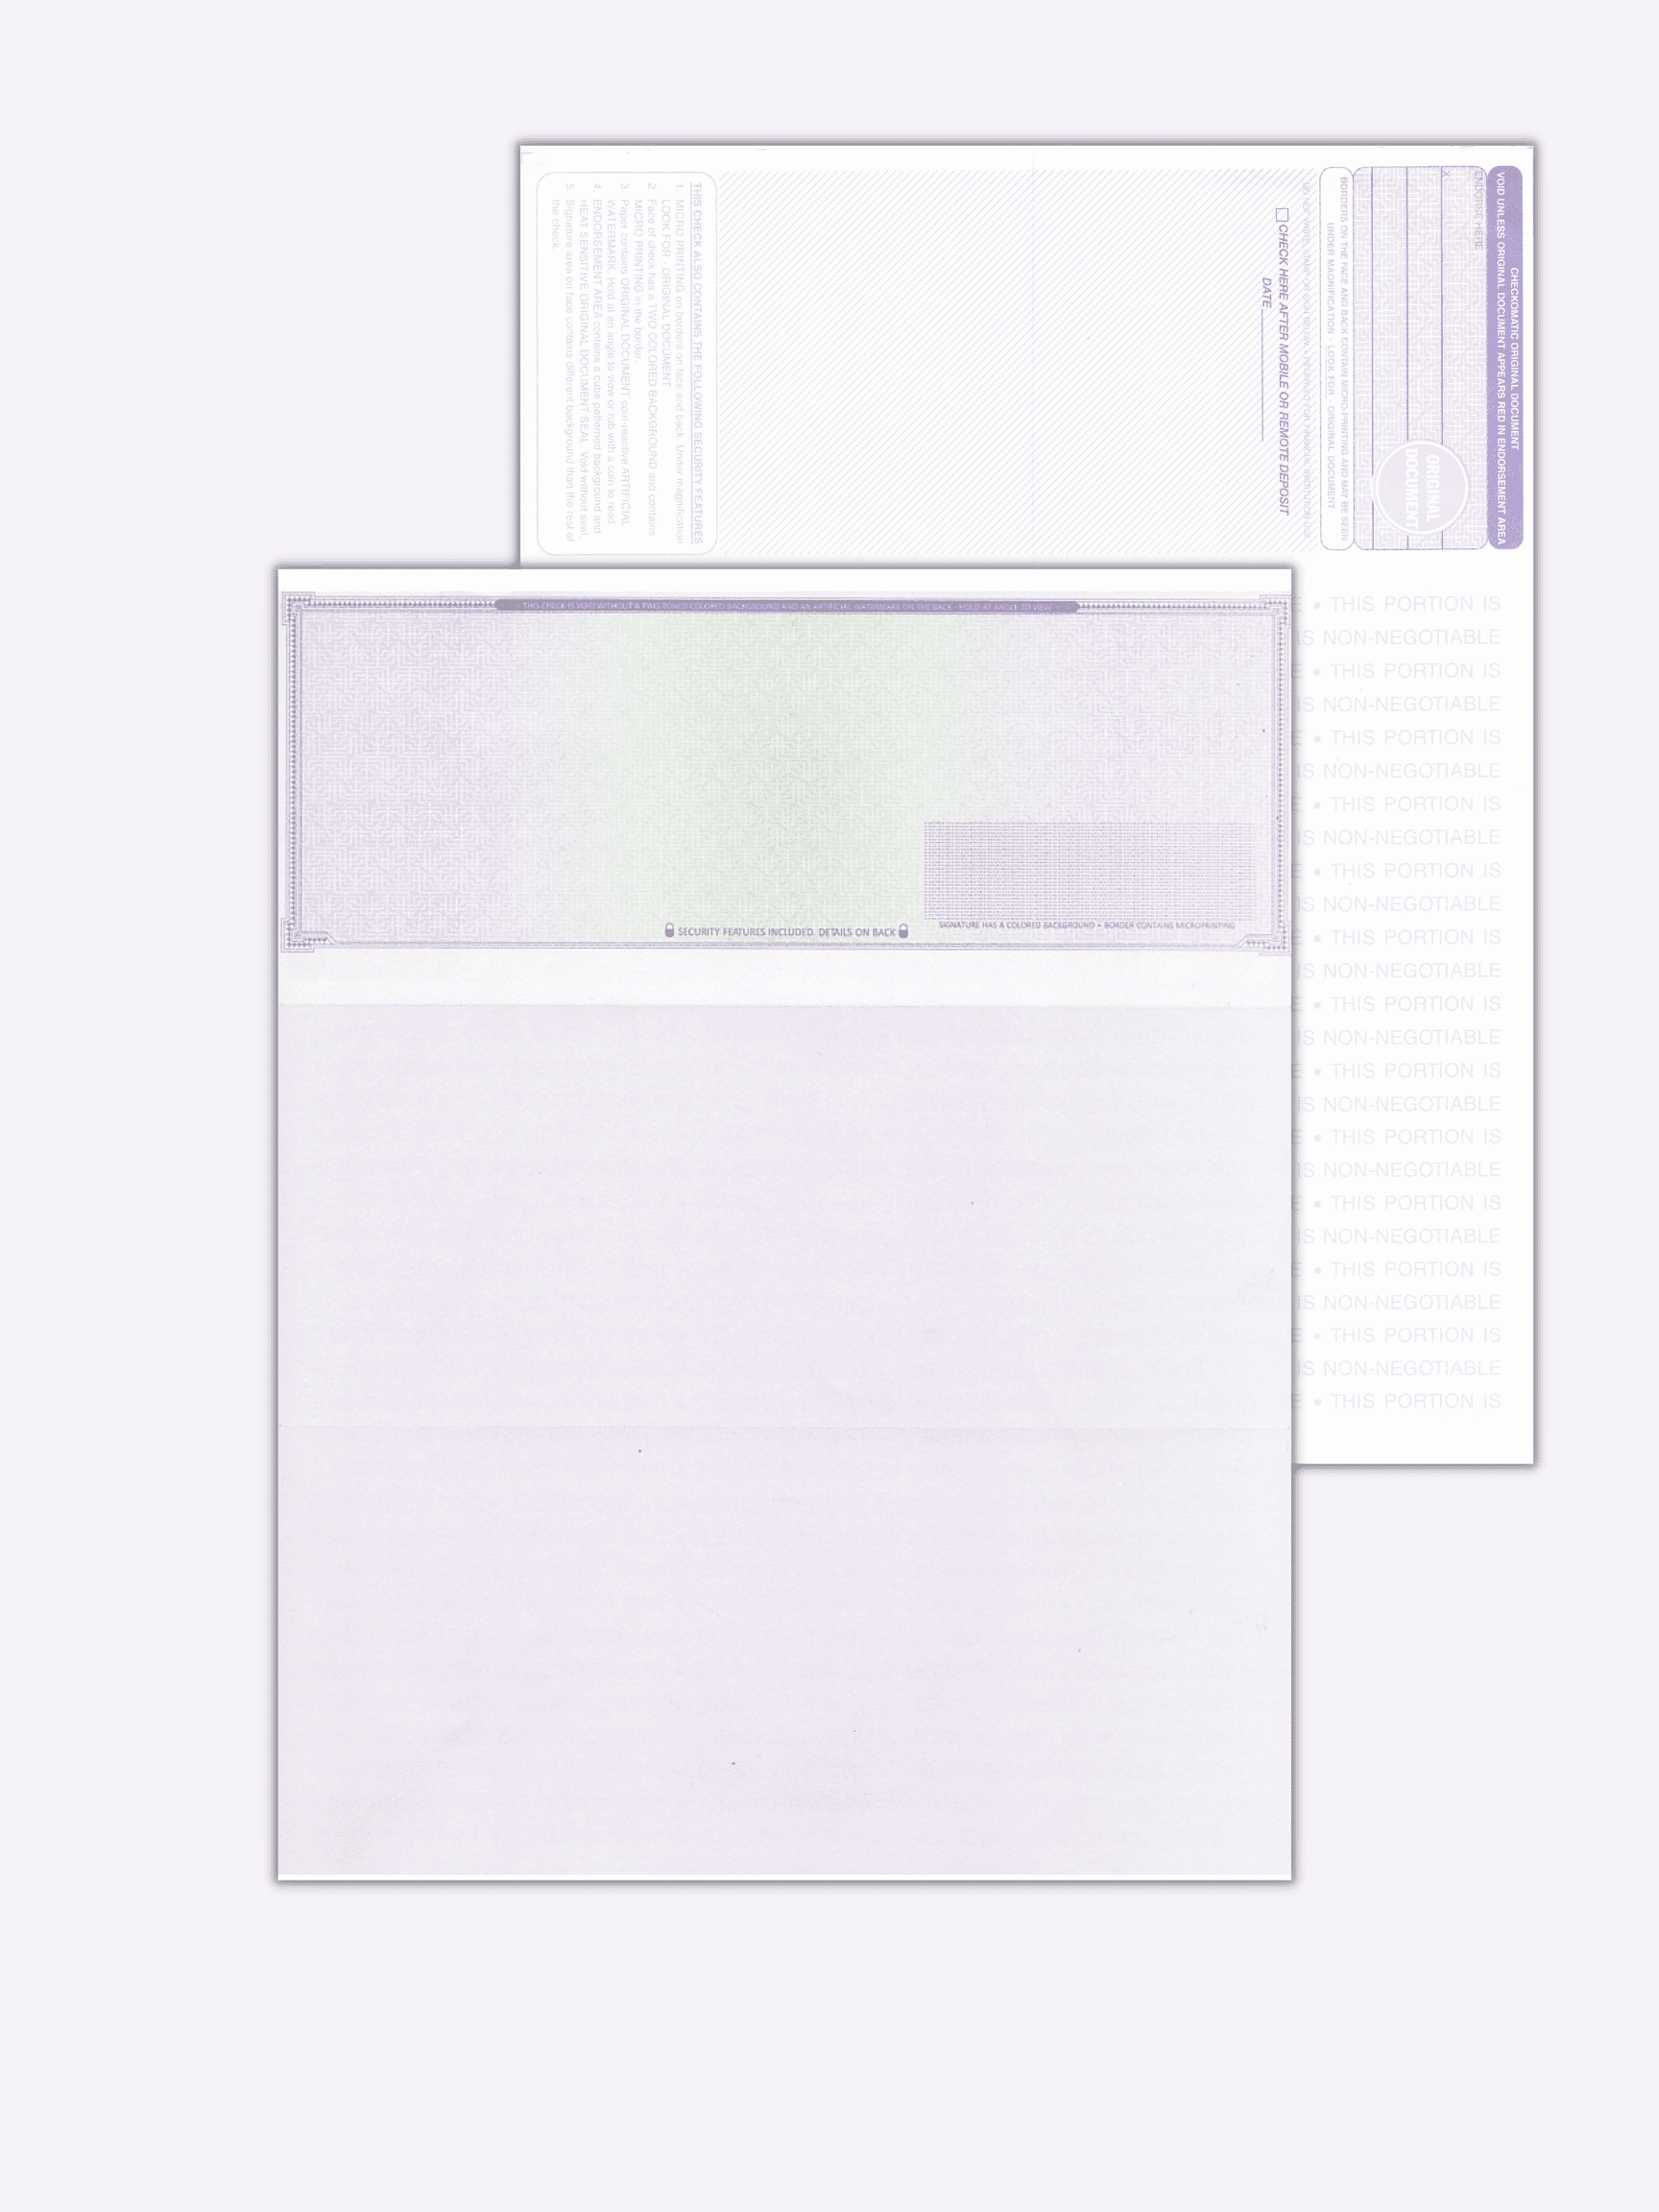 Blue Diamond Blank Check Stock Paper Check on Top 250 Computer Check Paper Compatible with QuickBooks 